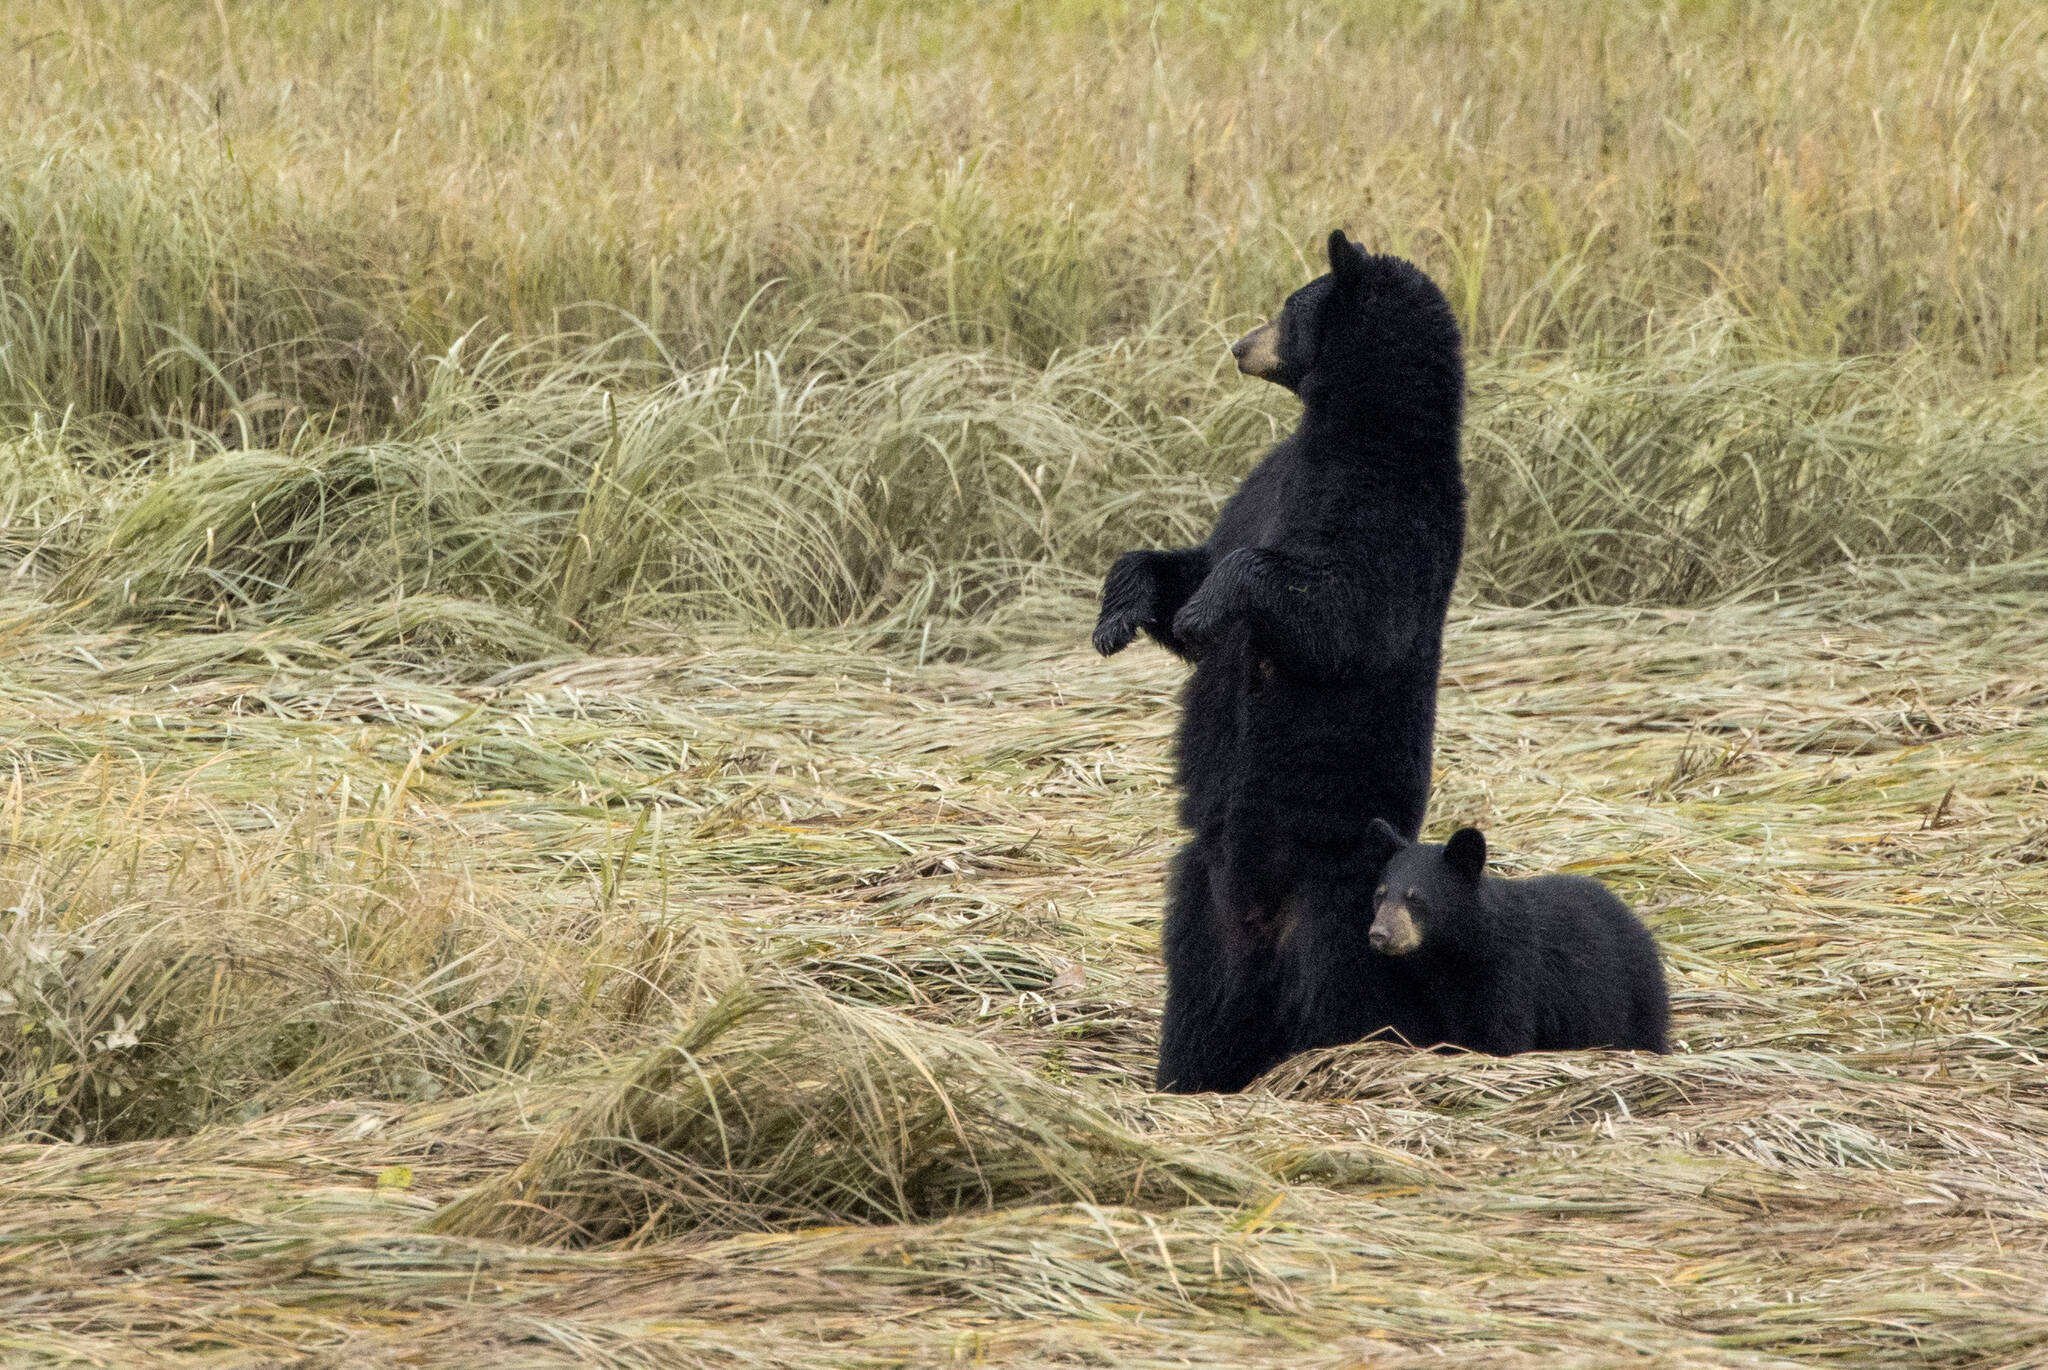 Black bear sow with cub on the Mendenhall Wetlands, just off Egan Expressway on Sept. 5. (Courtesy Photo / Kenneth Gill, gillfoto)